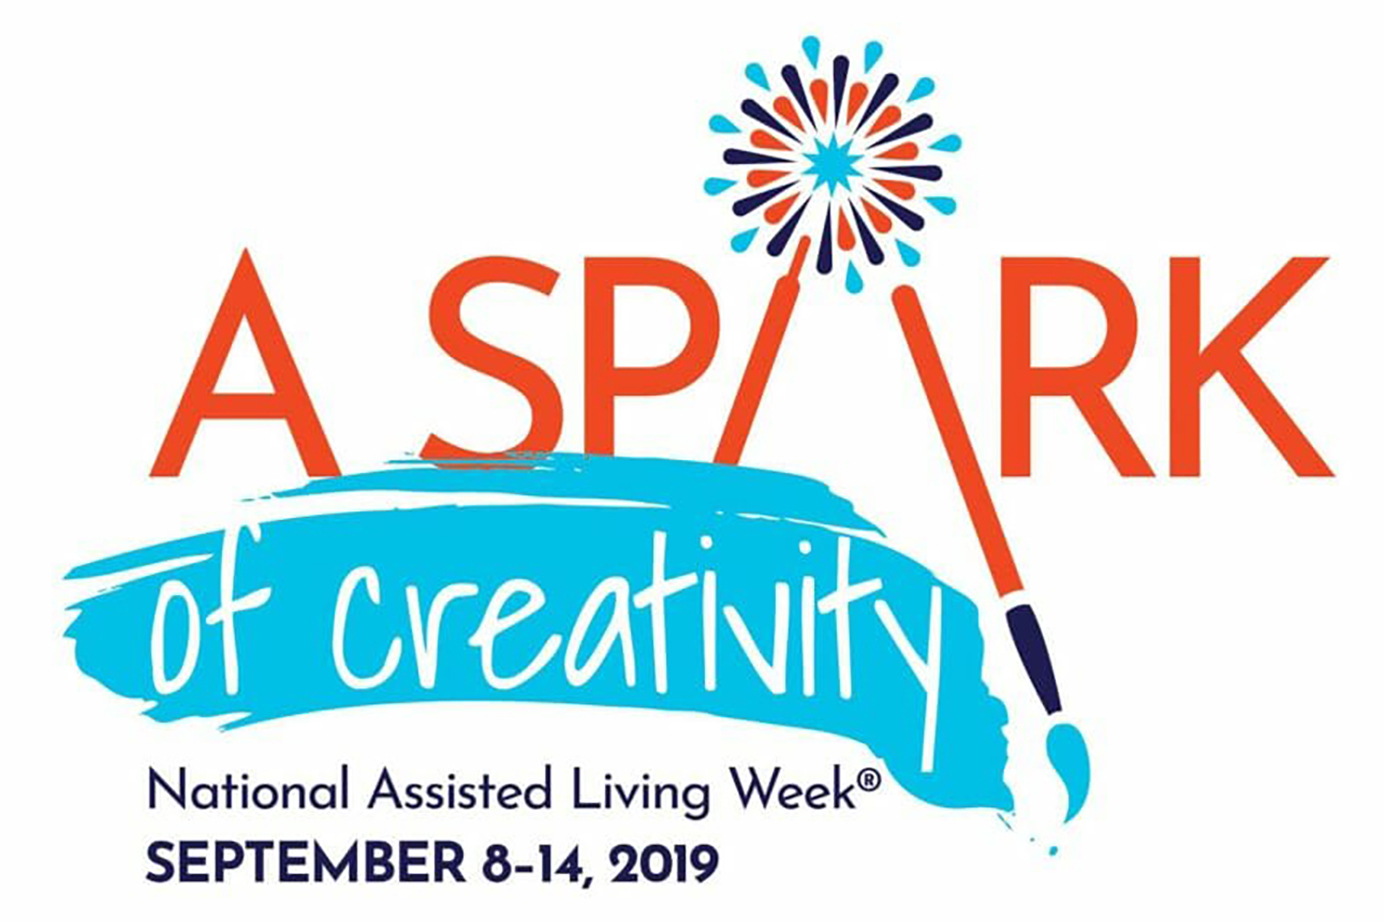 The National Assisted Living Week 2019 Logo reading "A Spark of Creativity"